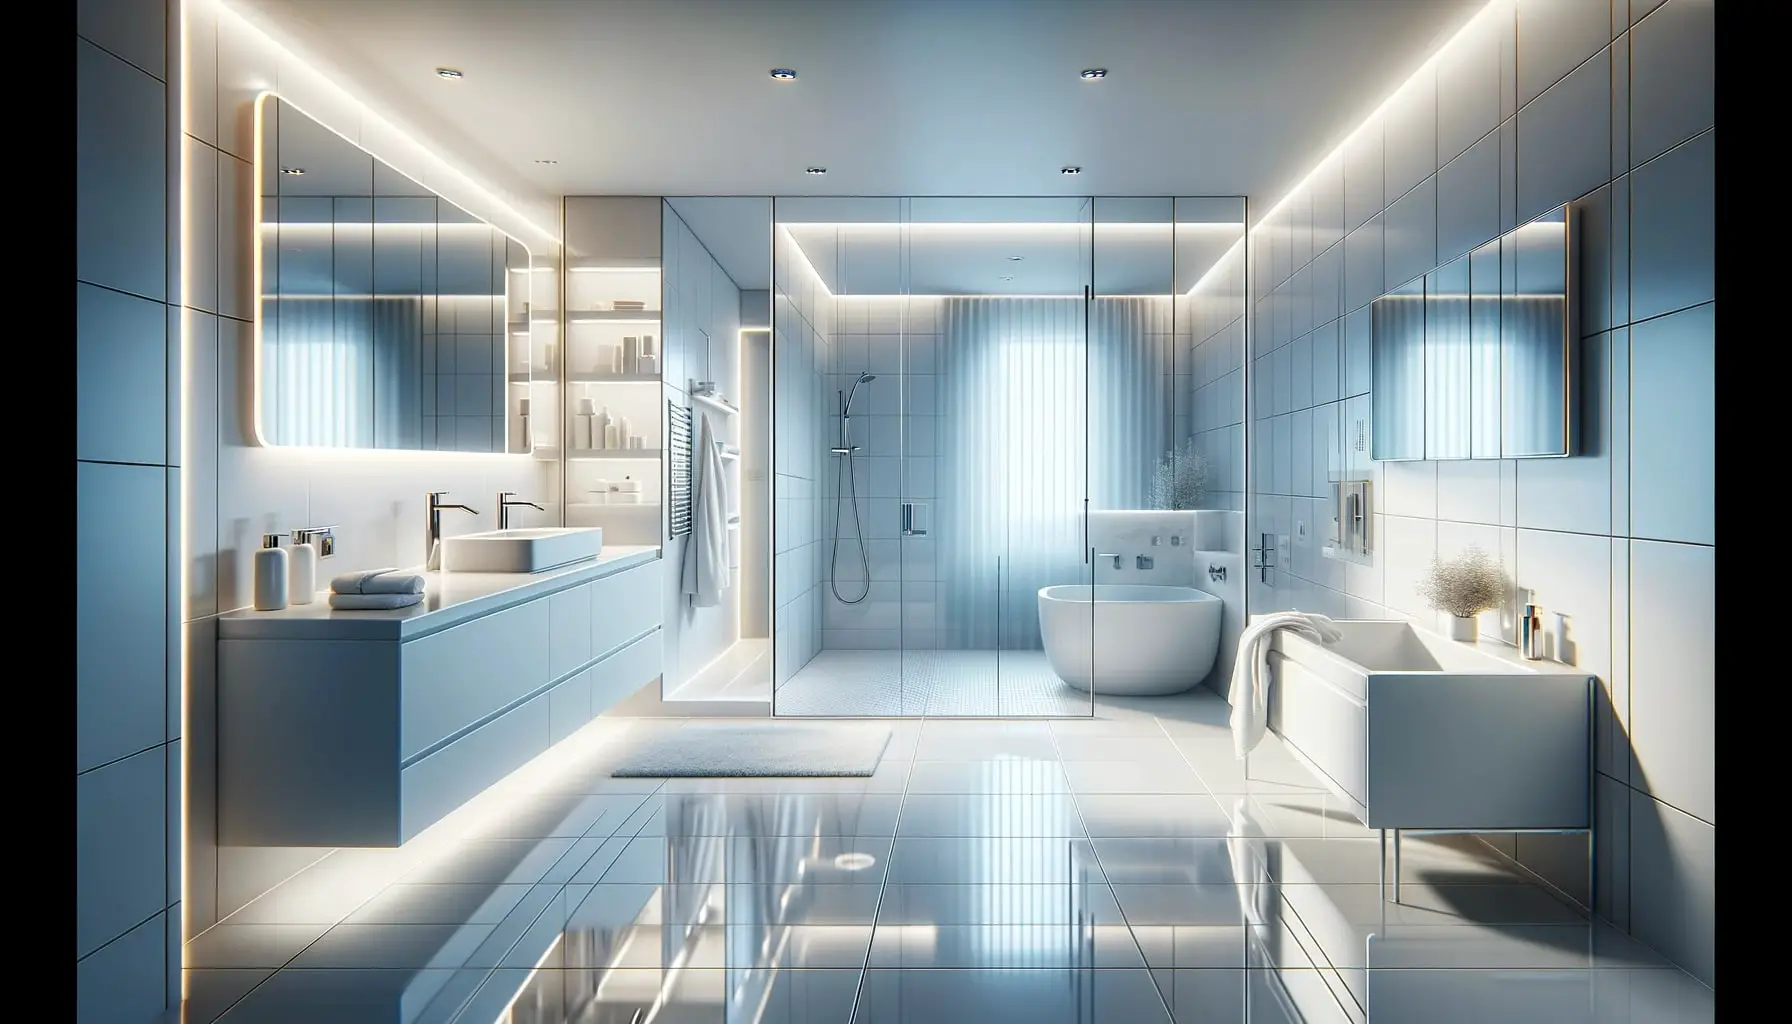 Tricks and Tips to Make Your Bathroom Look Bigger